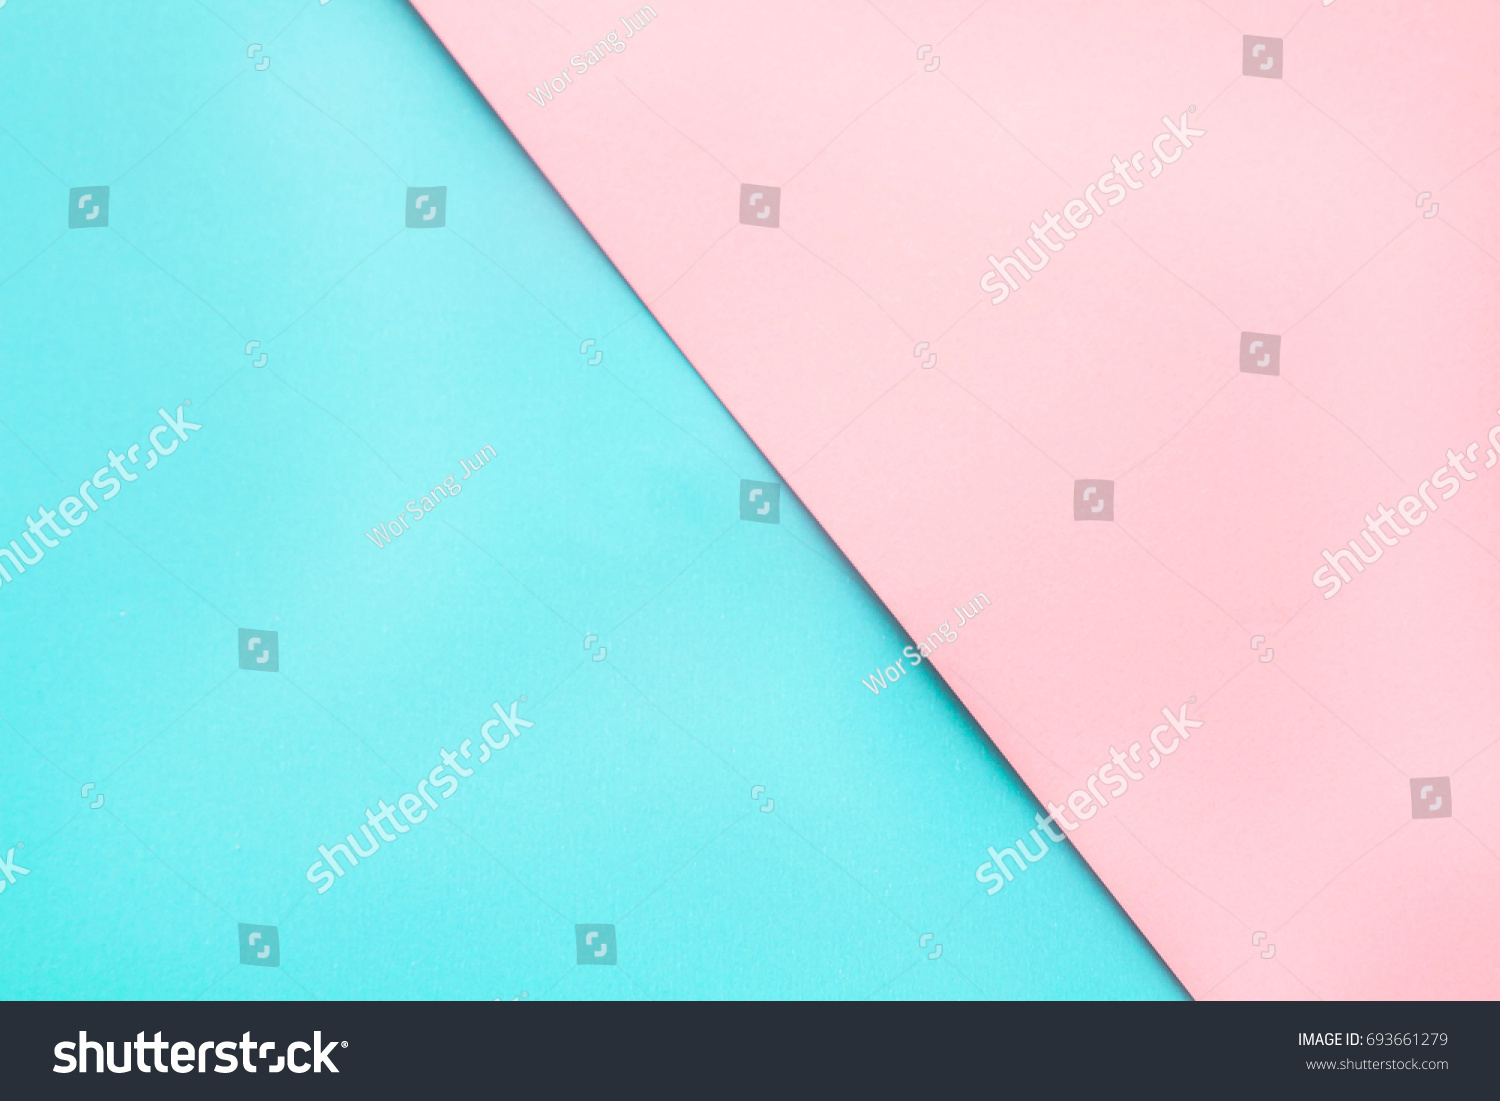 Blue and pink pastel color paper geometric flat lay background #693661279